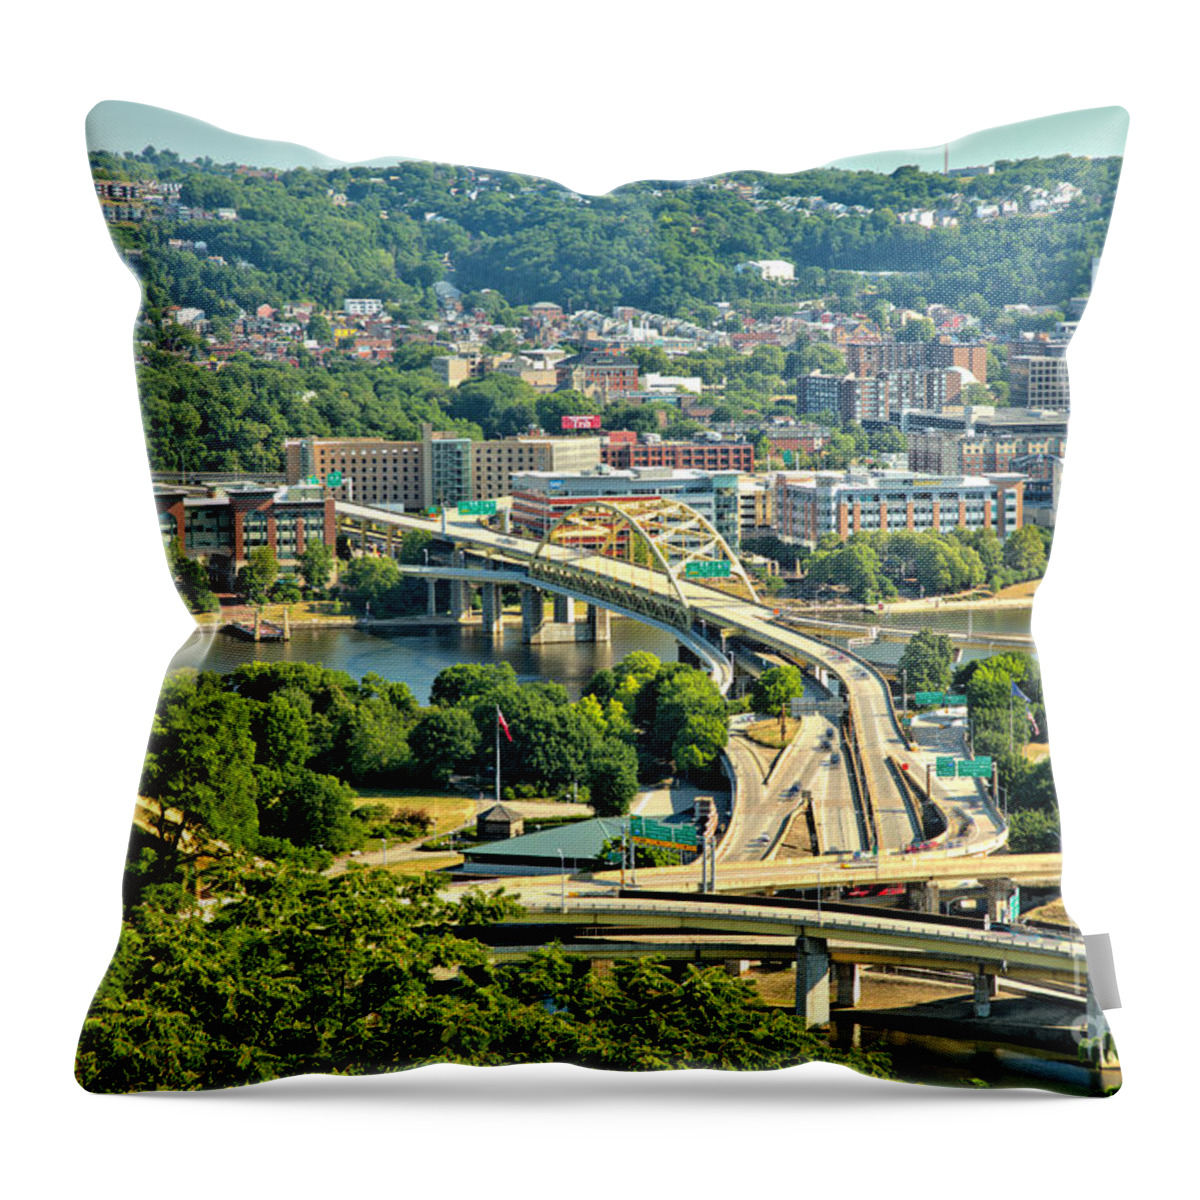 Pittsburgh Throw Pillow featuring the photograph Looking Out Over The Pittsburgh Fort Duquesne Bridge by Adam Jewell